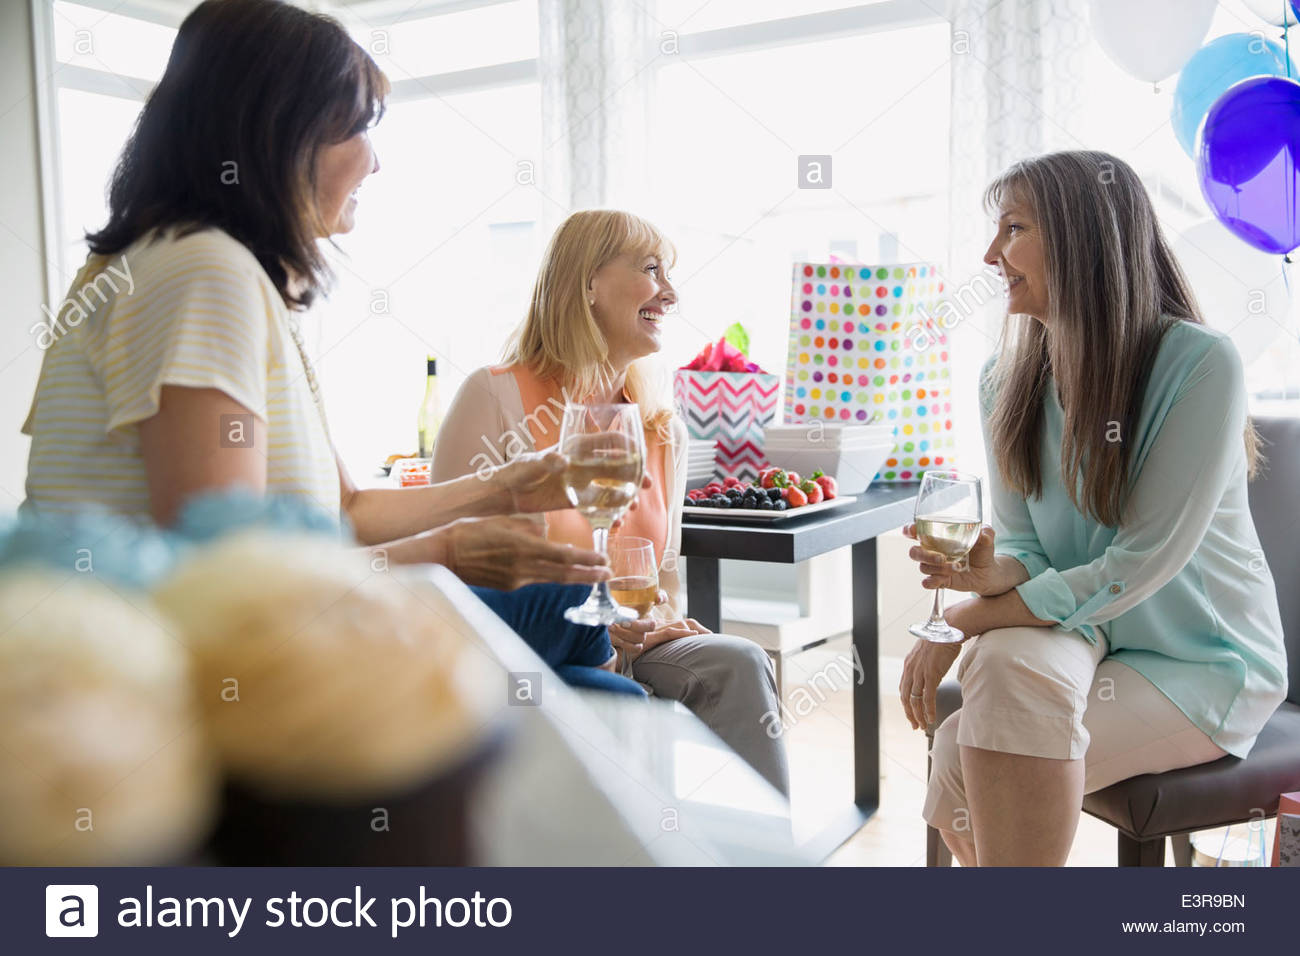 Women talking and drinking white wine at party Stock Photo